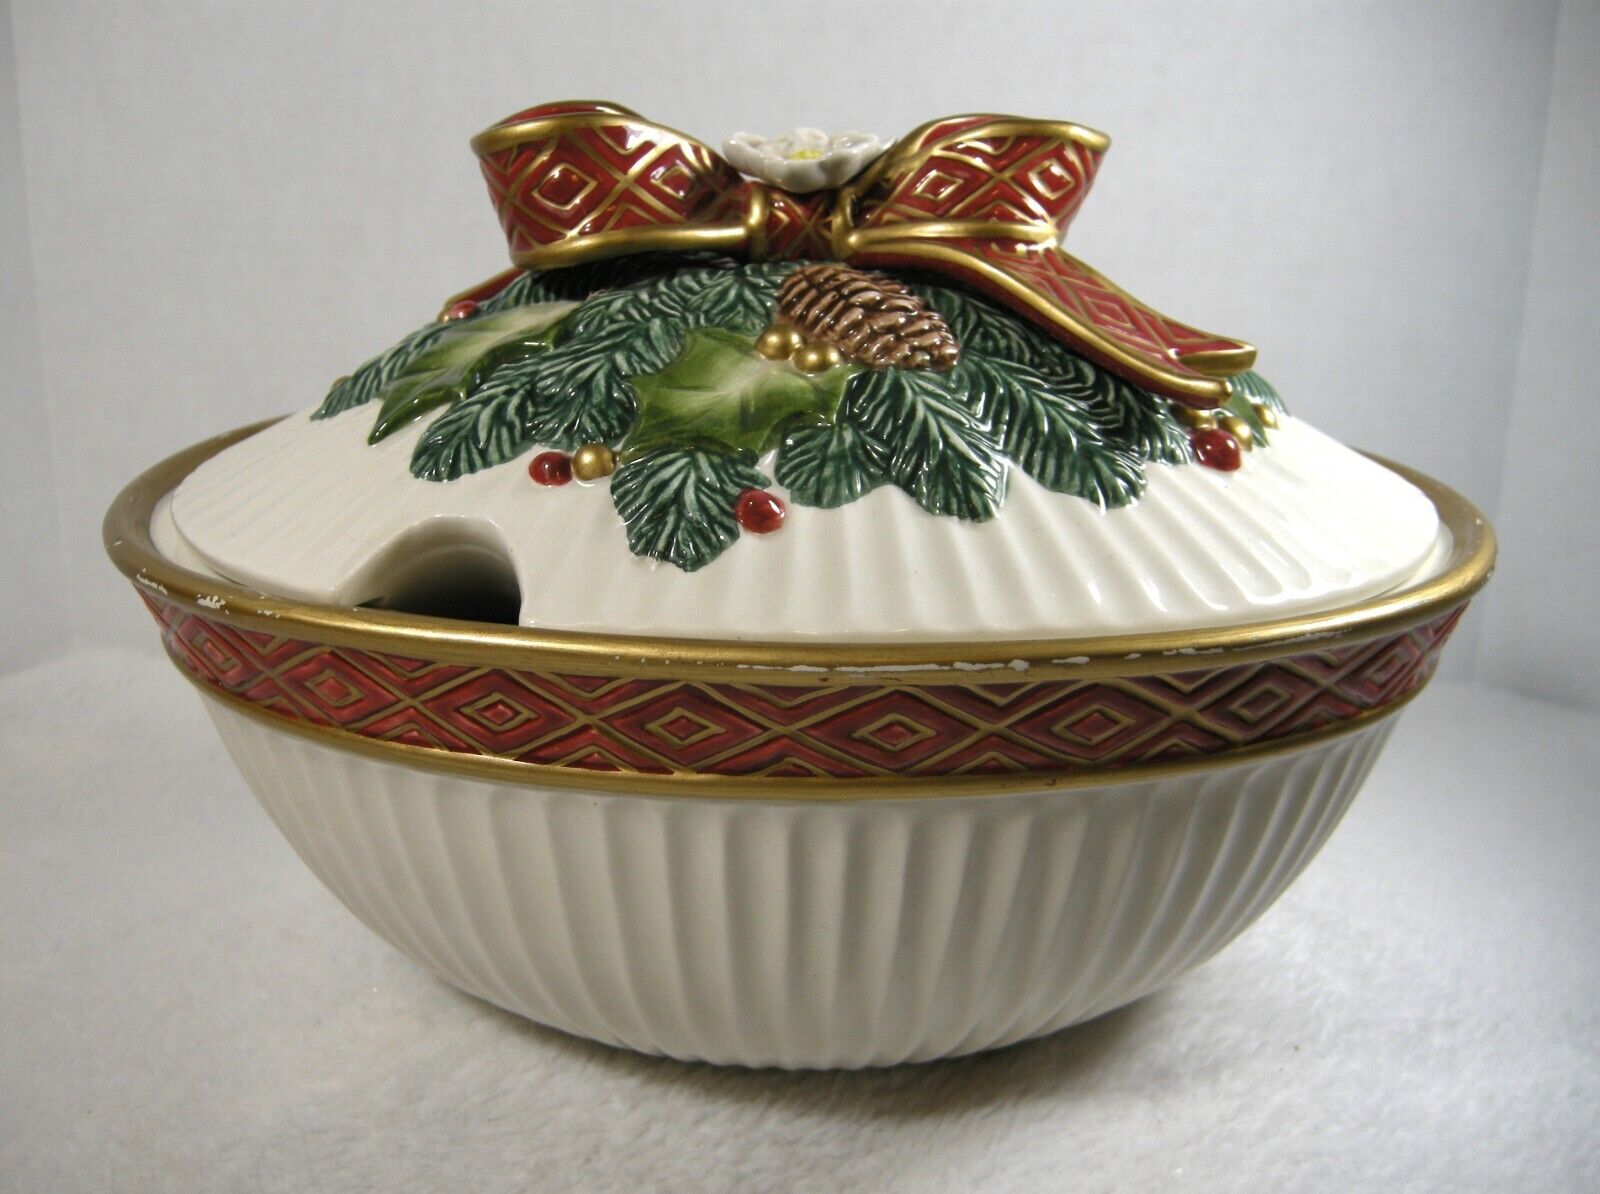 Fitz and Floyd Tureen with lid (no ladle) Christmas Rose Vtg 1995 Discontinued